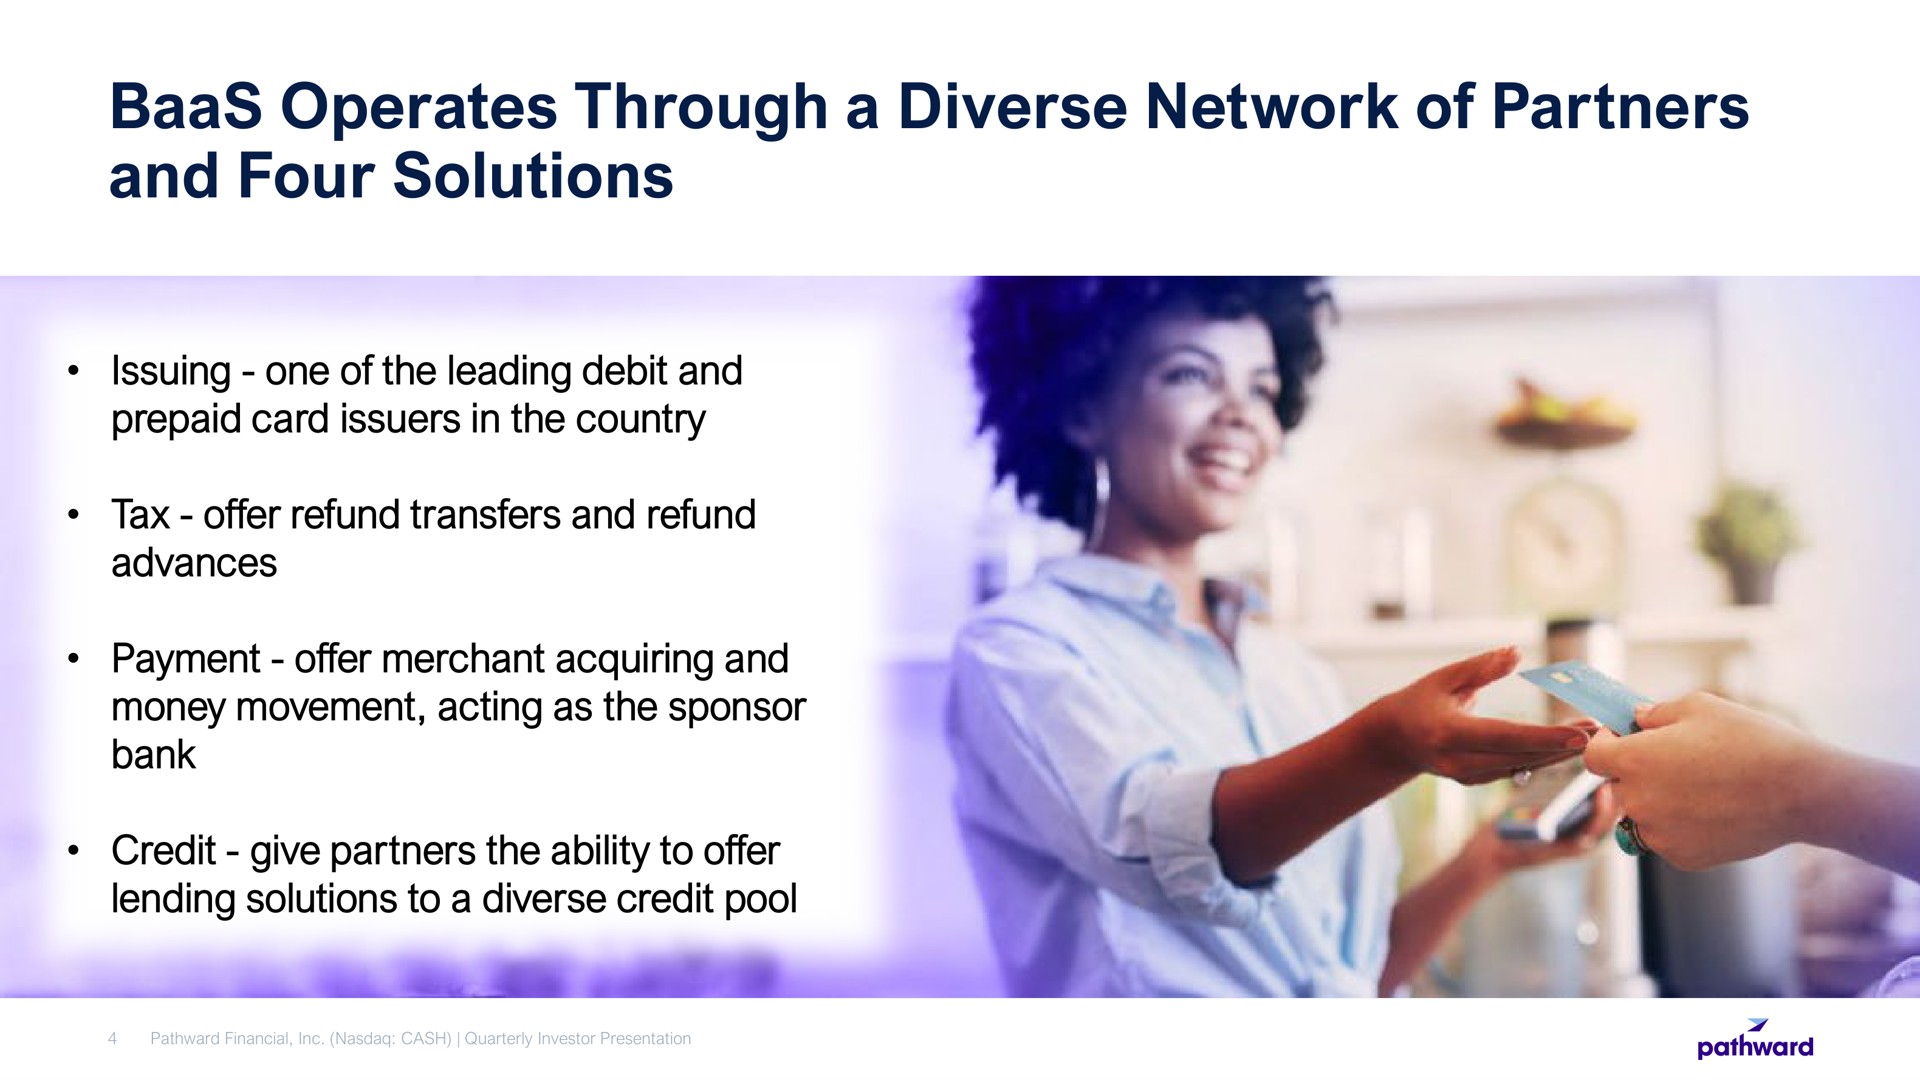 baas operates through a diverse network of partners and four solutions | Pathward Financial